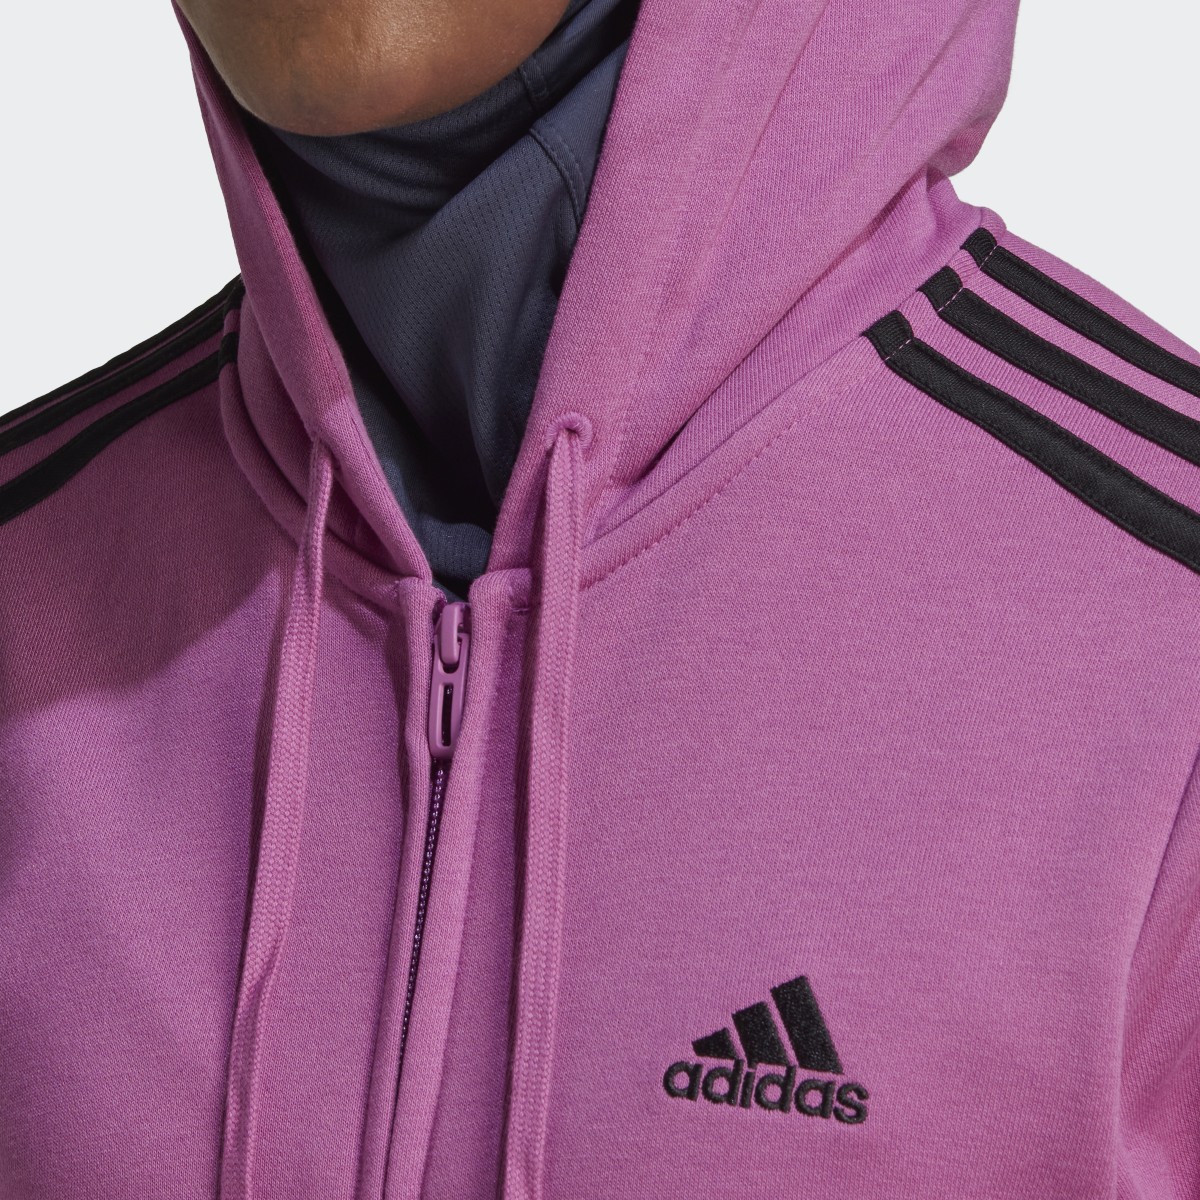 Adidas Essentials French Terry 3-Stripes Full-Zip Hoodie. 6